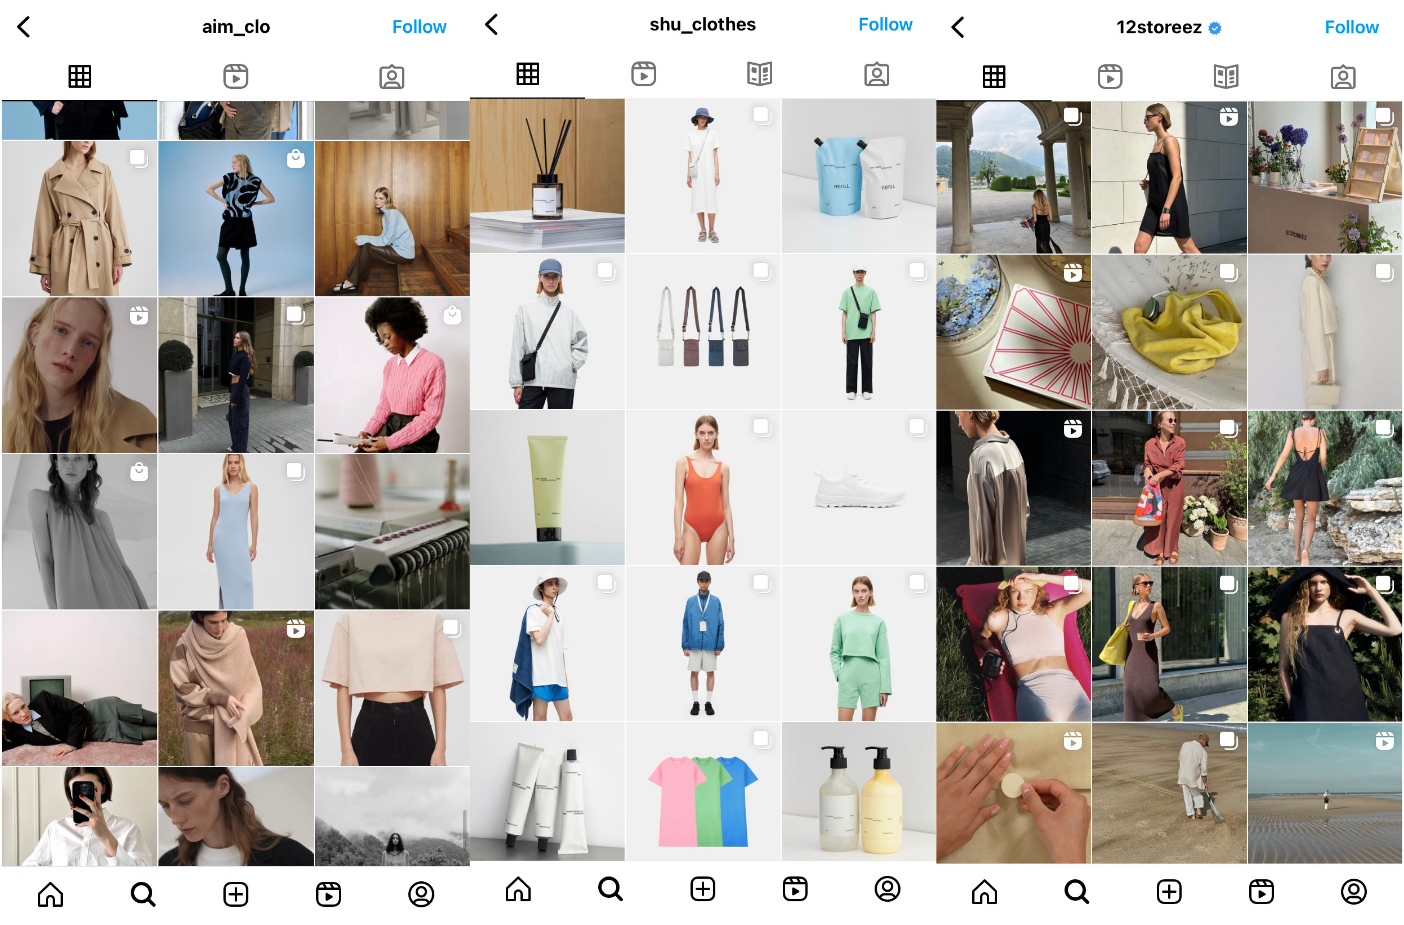 Unified style examples for Instagram business profiles